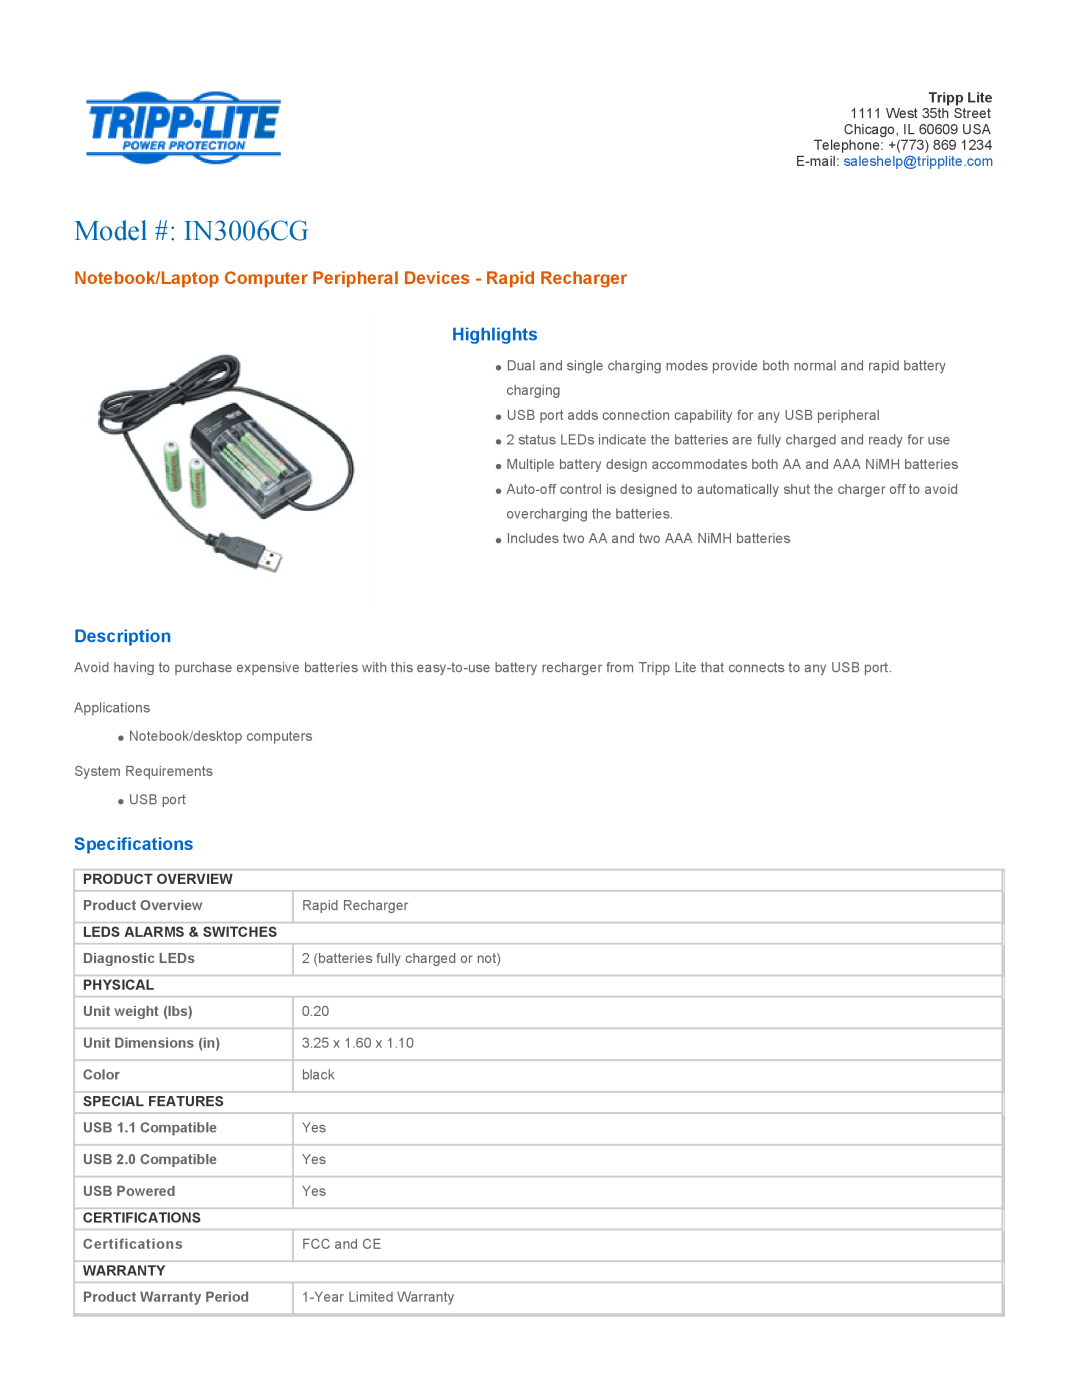 Tripp Lite specifications Model # IN3006CG, Notebook/Laptop Computer Peripheral Devices - Rapid Recharger, Highlights 